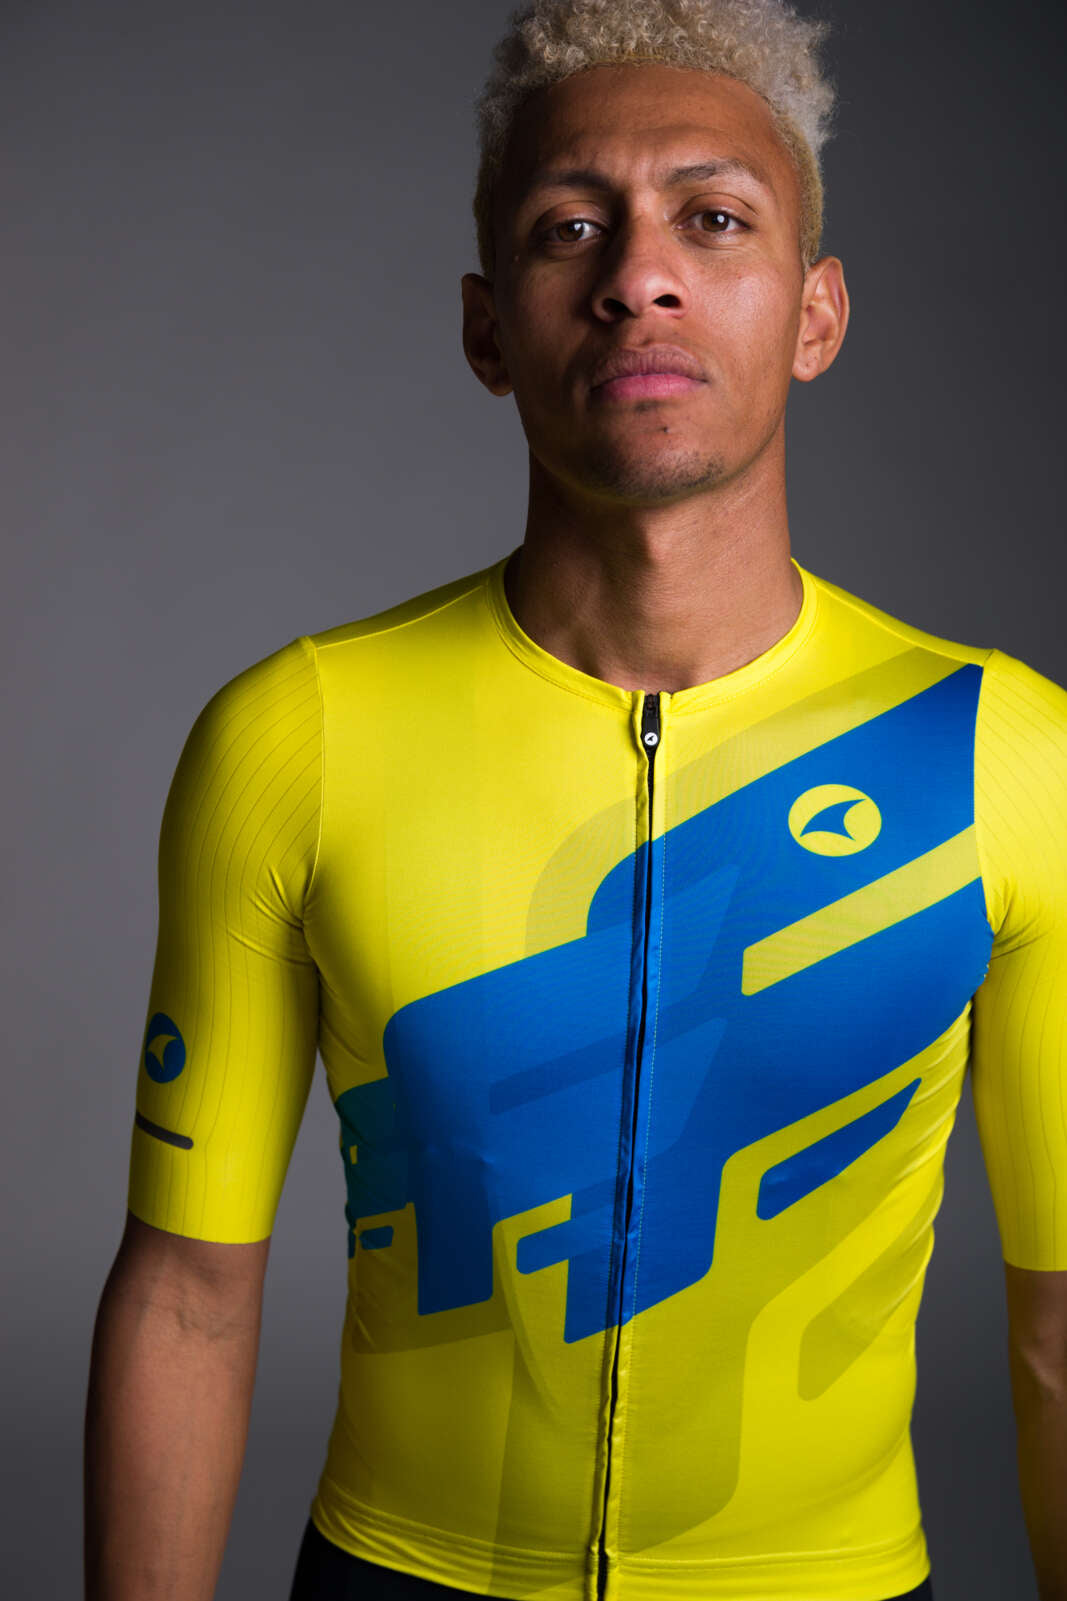 Men's Yellow Aero Cycling Jersey - Flyte Close-Up Front View